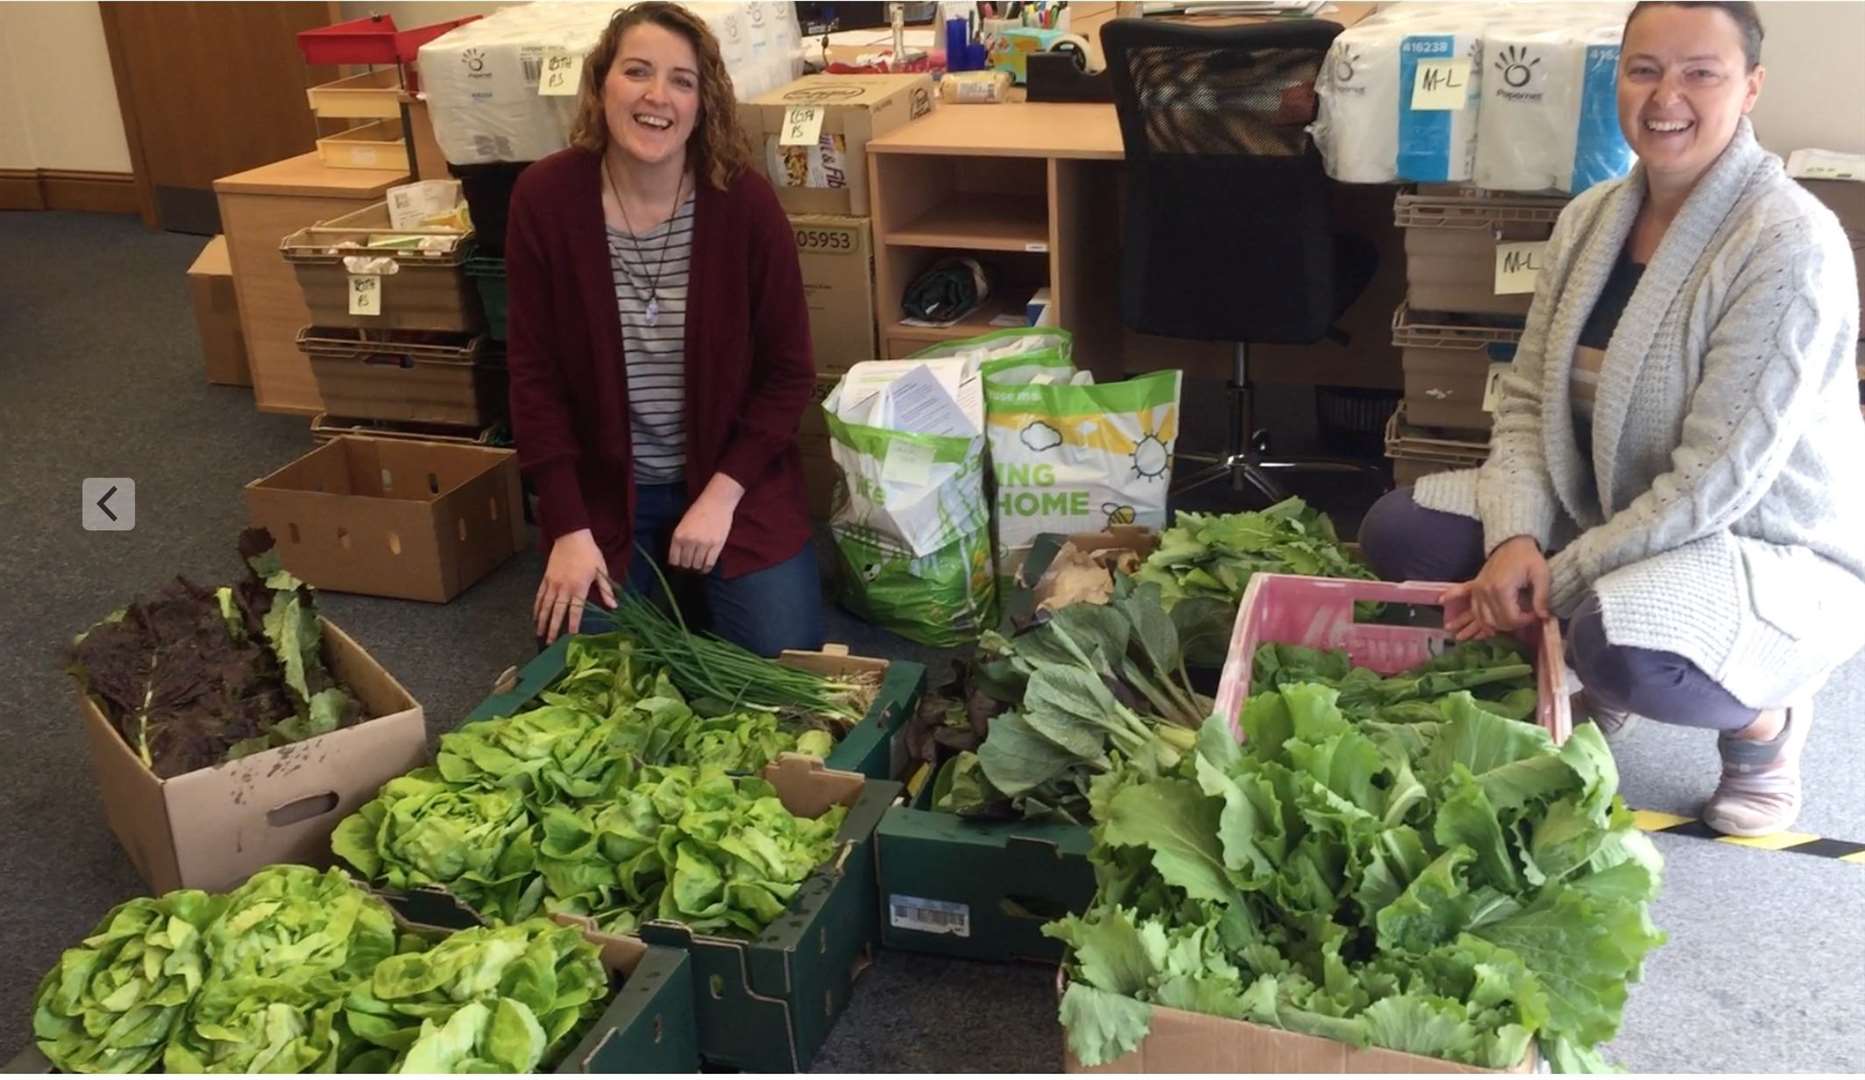 Moray Food Plus volunteer development officer Gillian Pirie and administrator Yvonne Milton with donated vegetables including head lettuce, spinach, spring onions, pak choi and cabbage.